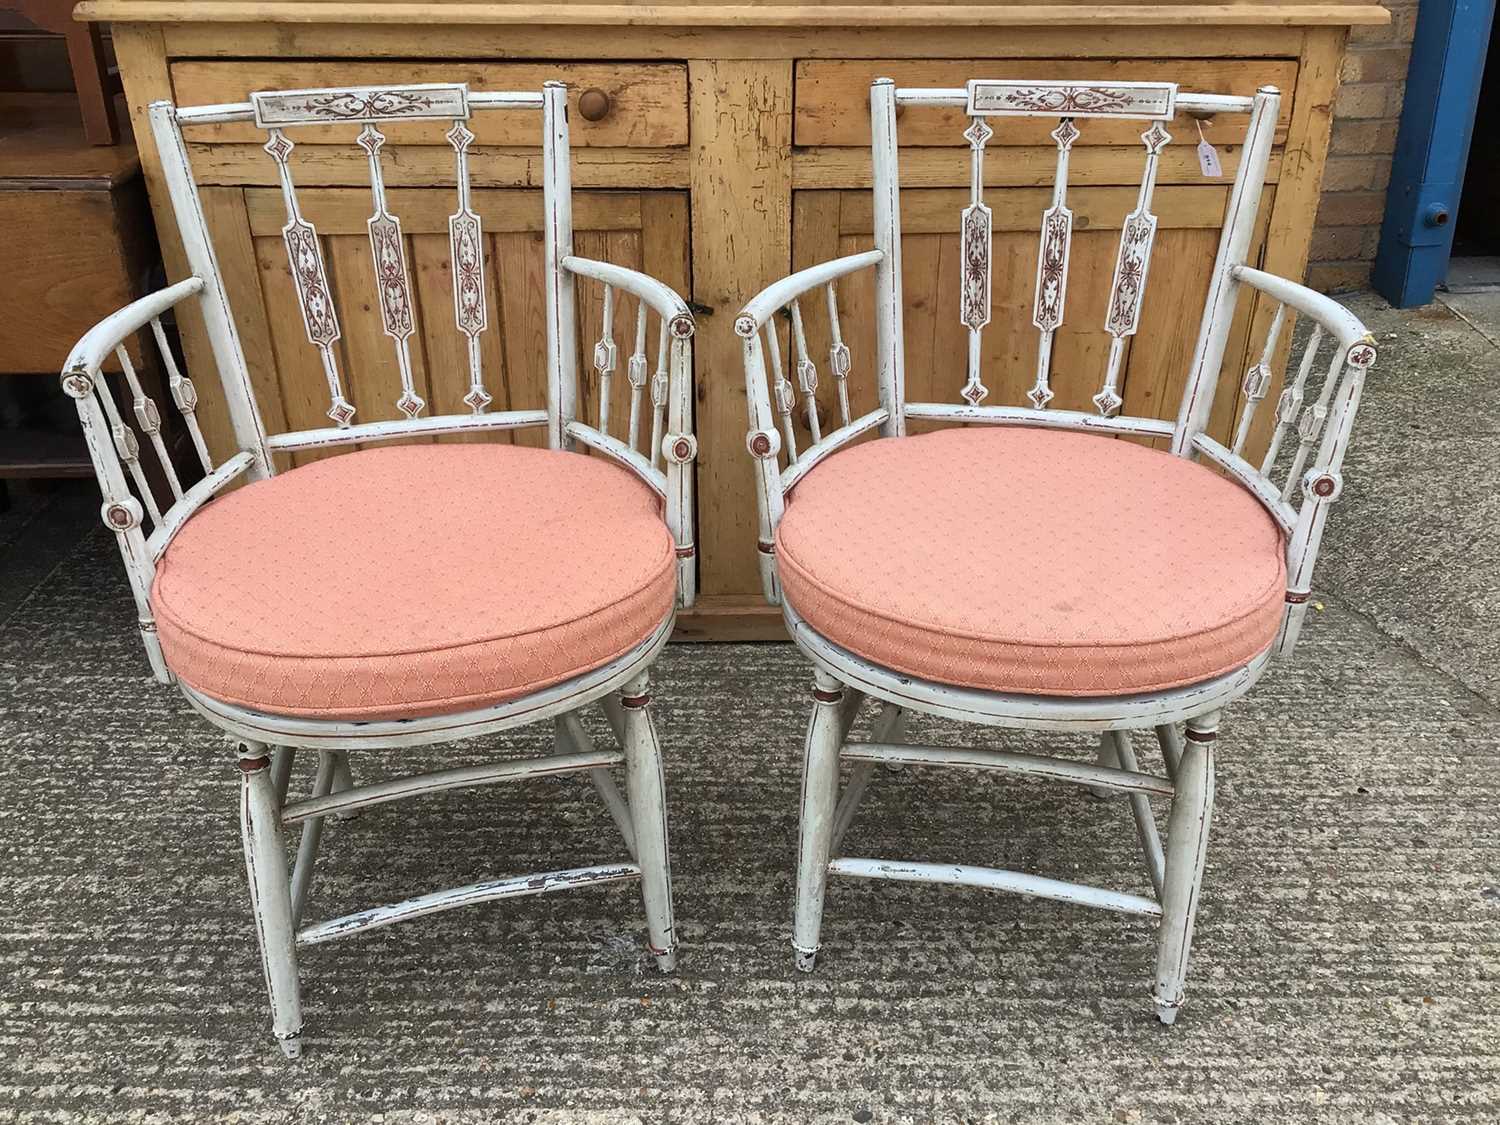 Lot 919 - Pair of painted open elbow chairs with decorative shaped backs, caned seats with cushions, on shaped legs joined by stretchers